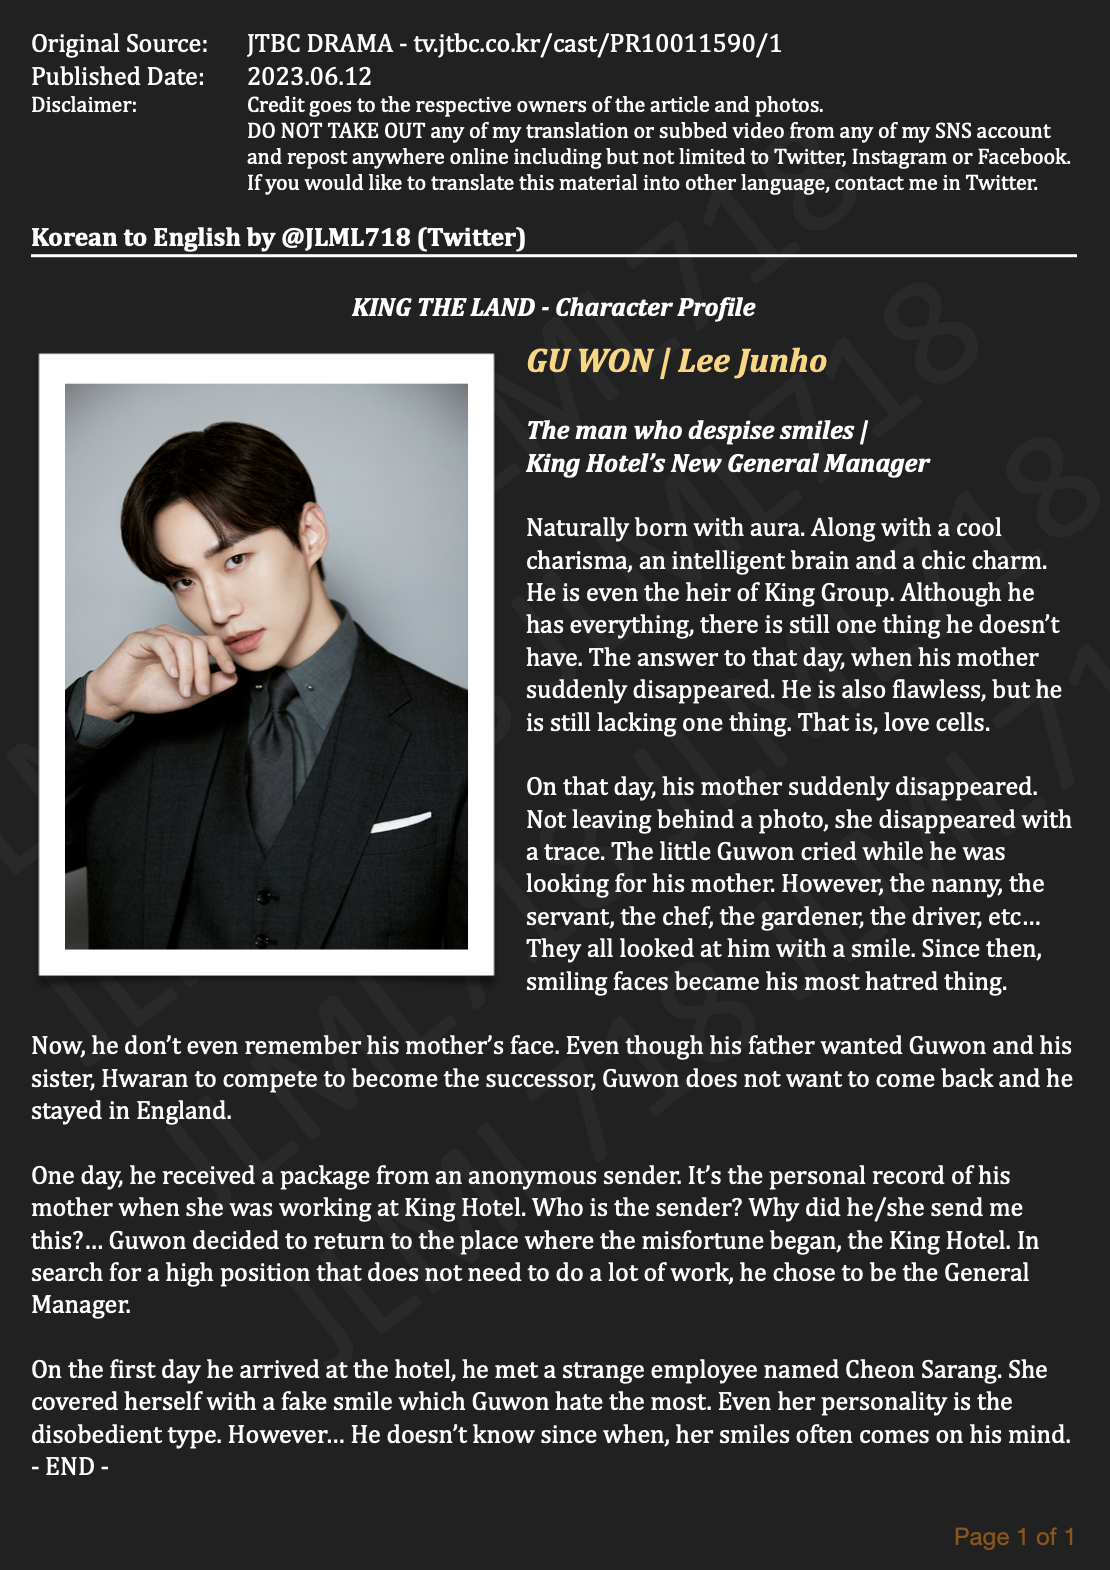 ENG TRANS – 2PM Junho – “King the Land” Character Relationship